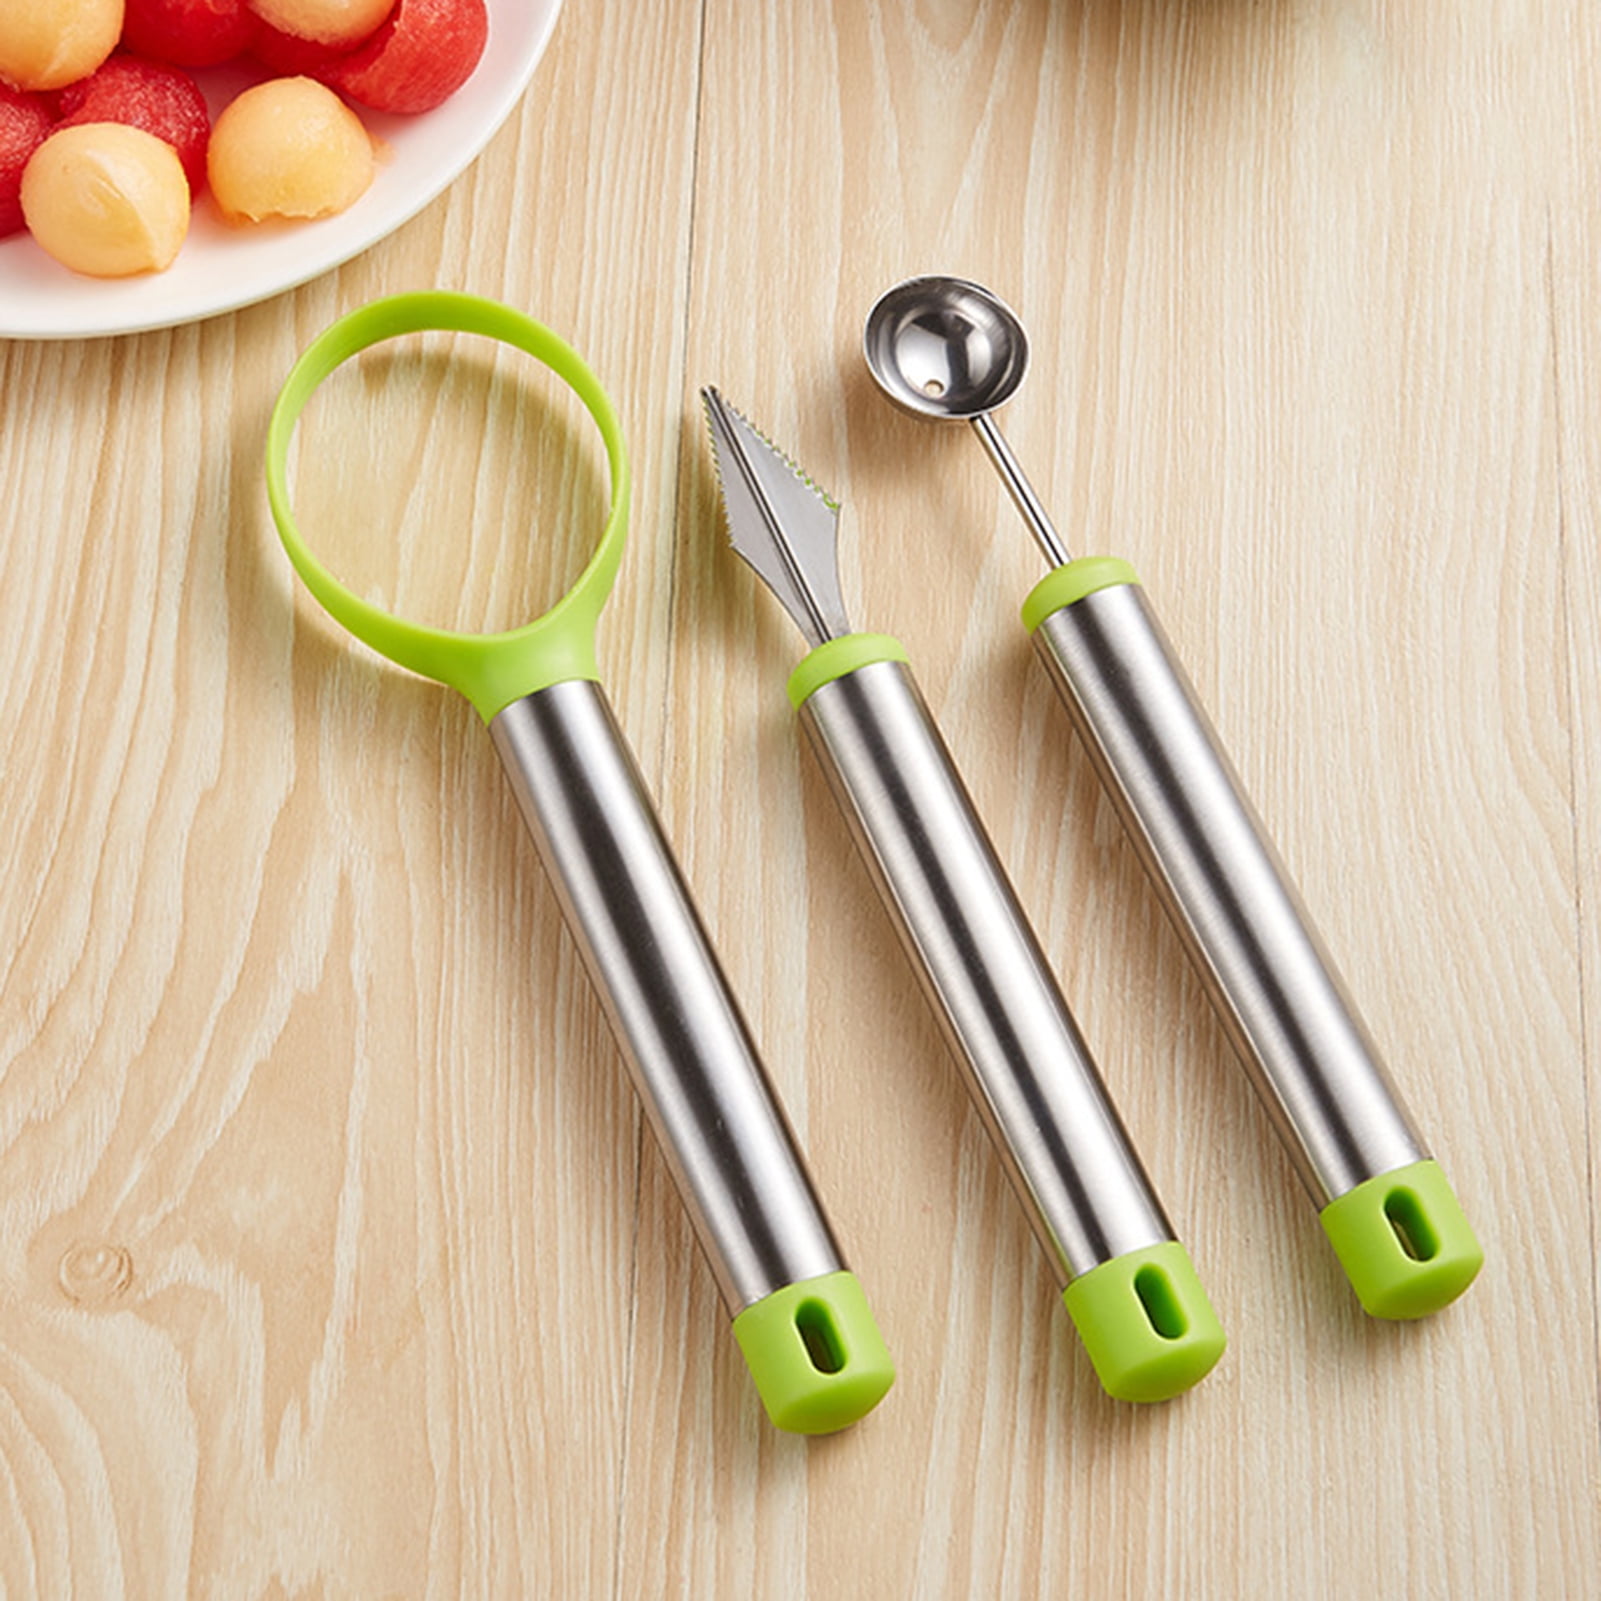 Ucheom Melon Baller Scoop Set, 4 In 1 Stainless Steel Fruit Carving Tools  Set, Fruit Scooper Seed Remover Watermelon Knife, Dig Pulp Separator Fruit